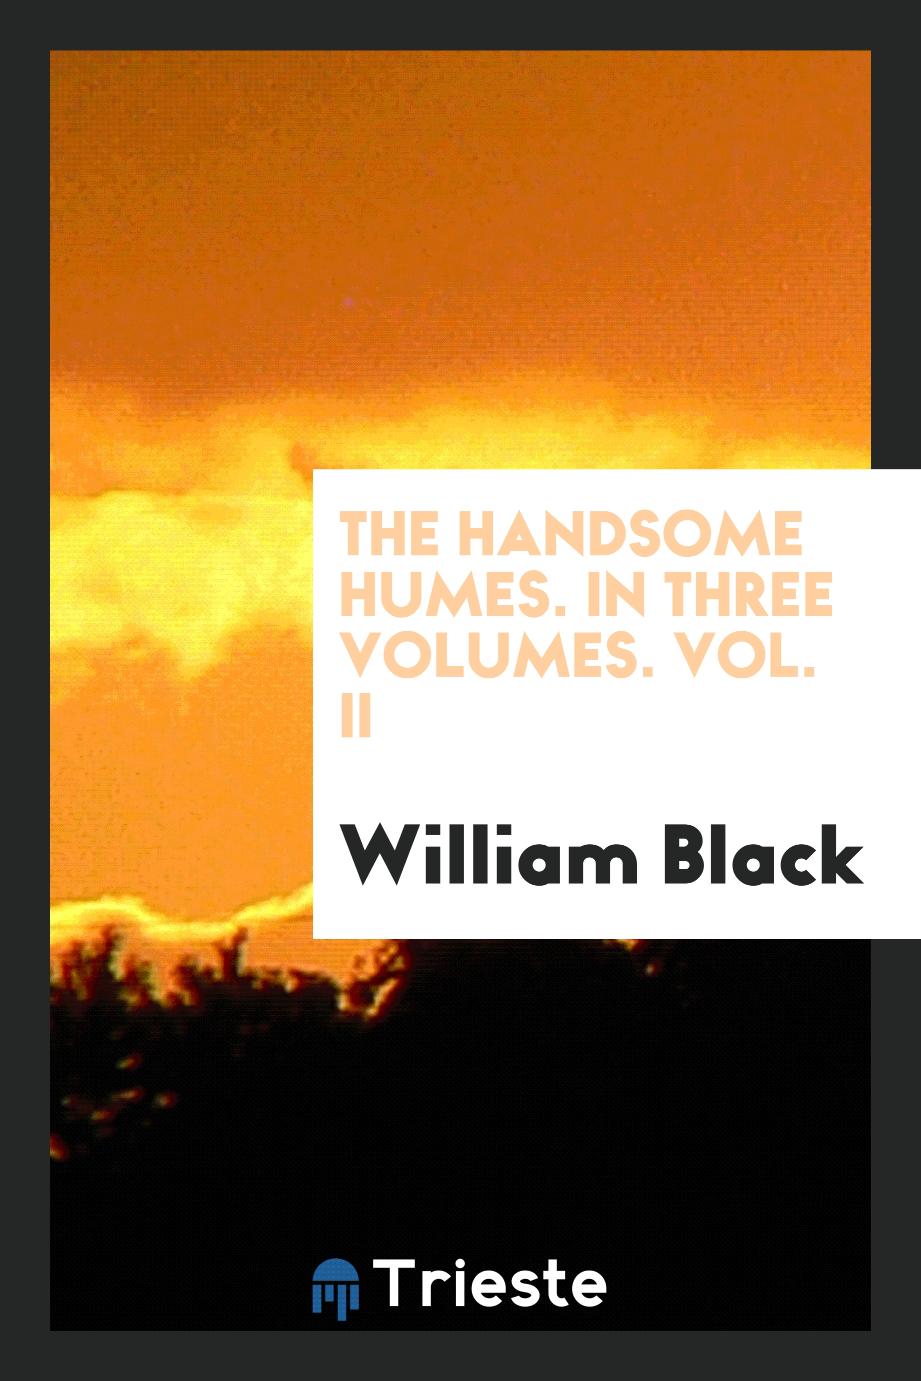 The handsome Humes. In three volumes. Vol. II